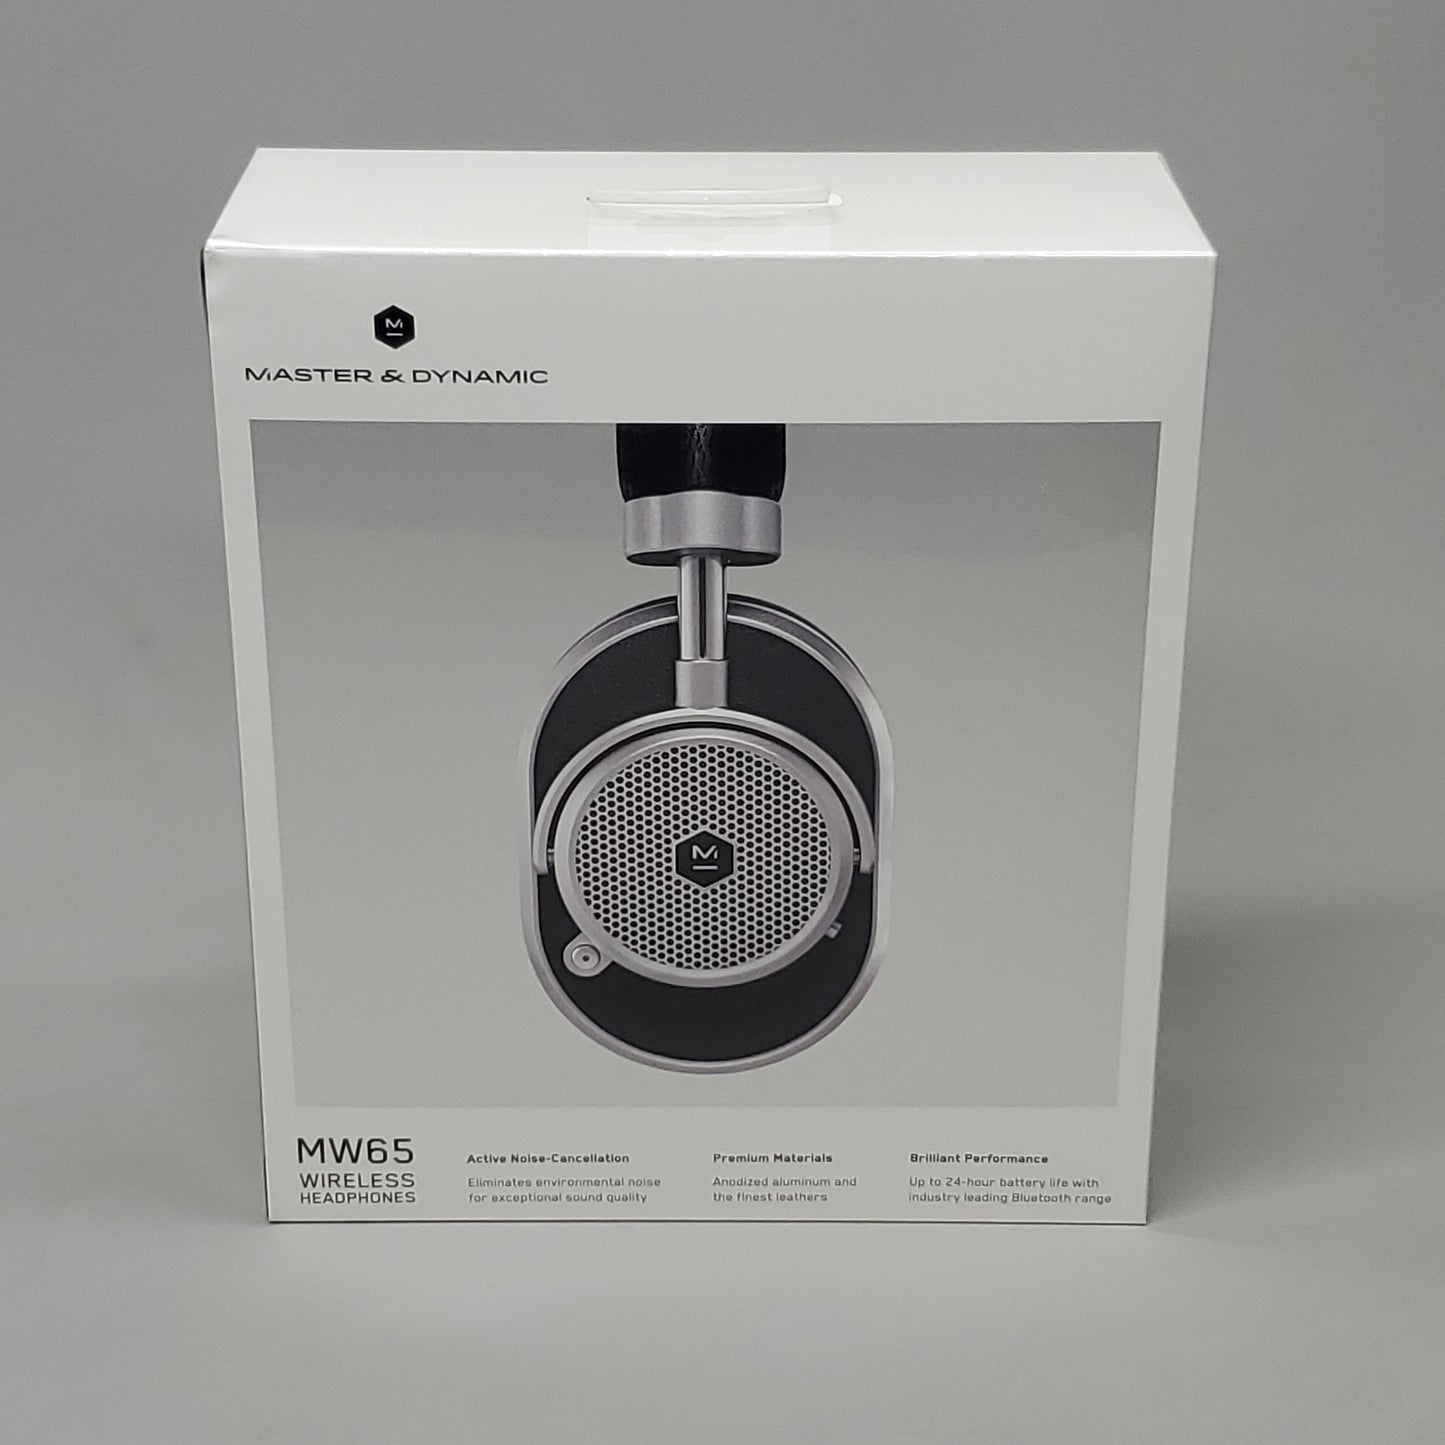 MASTER & DYNAMIC Wireless Headphones Active Noise Cancellation 24HR Battery MW65 (New Sealed)